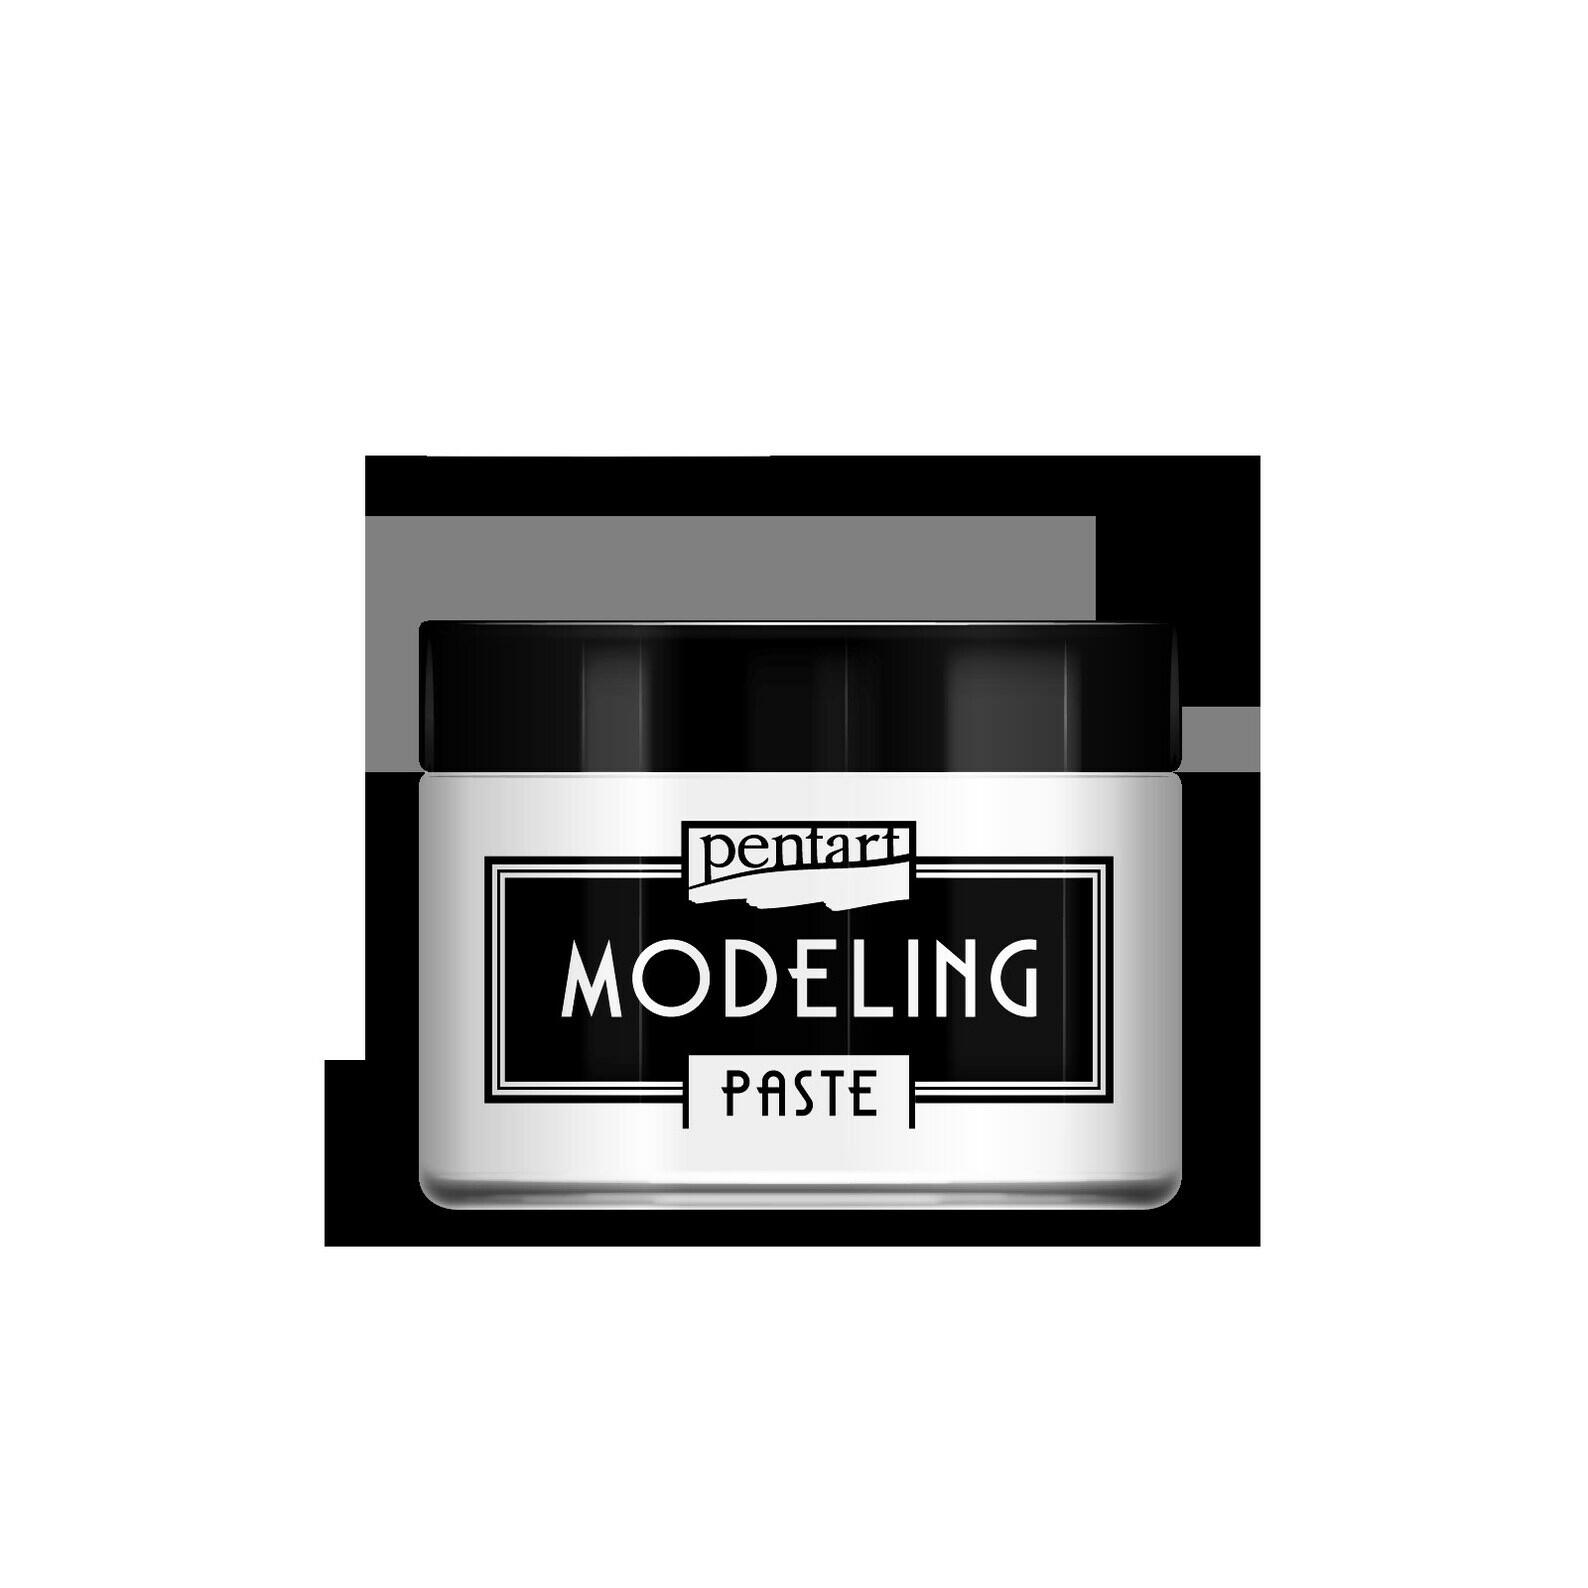 How to create grainy texture paste ysing modeling paste and decorative, modeling paste